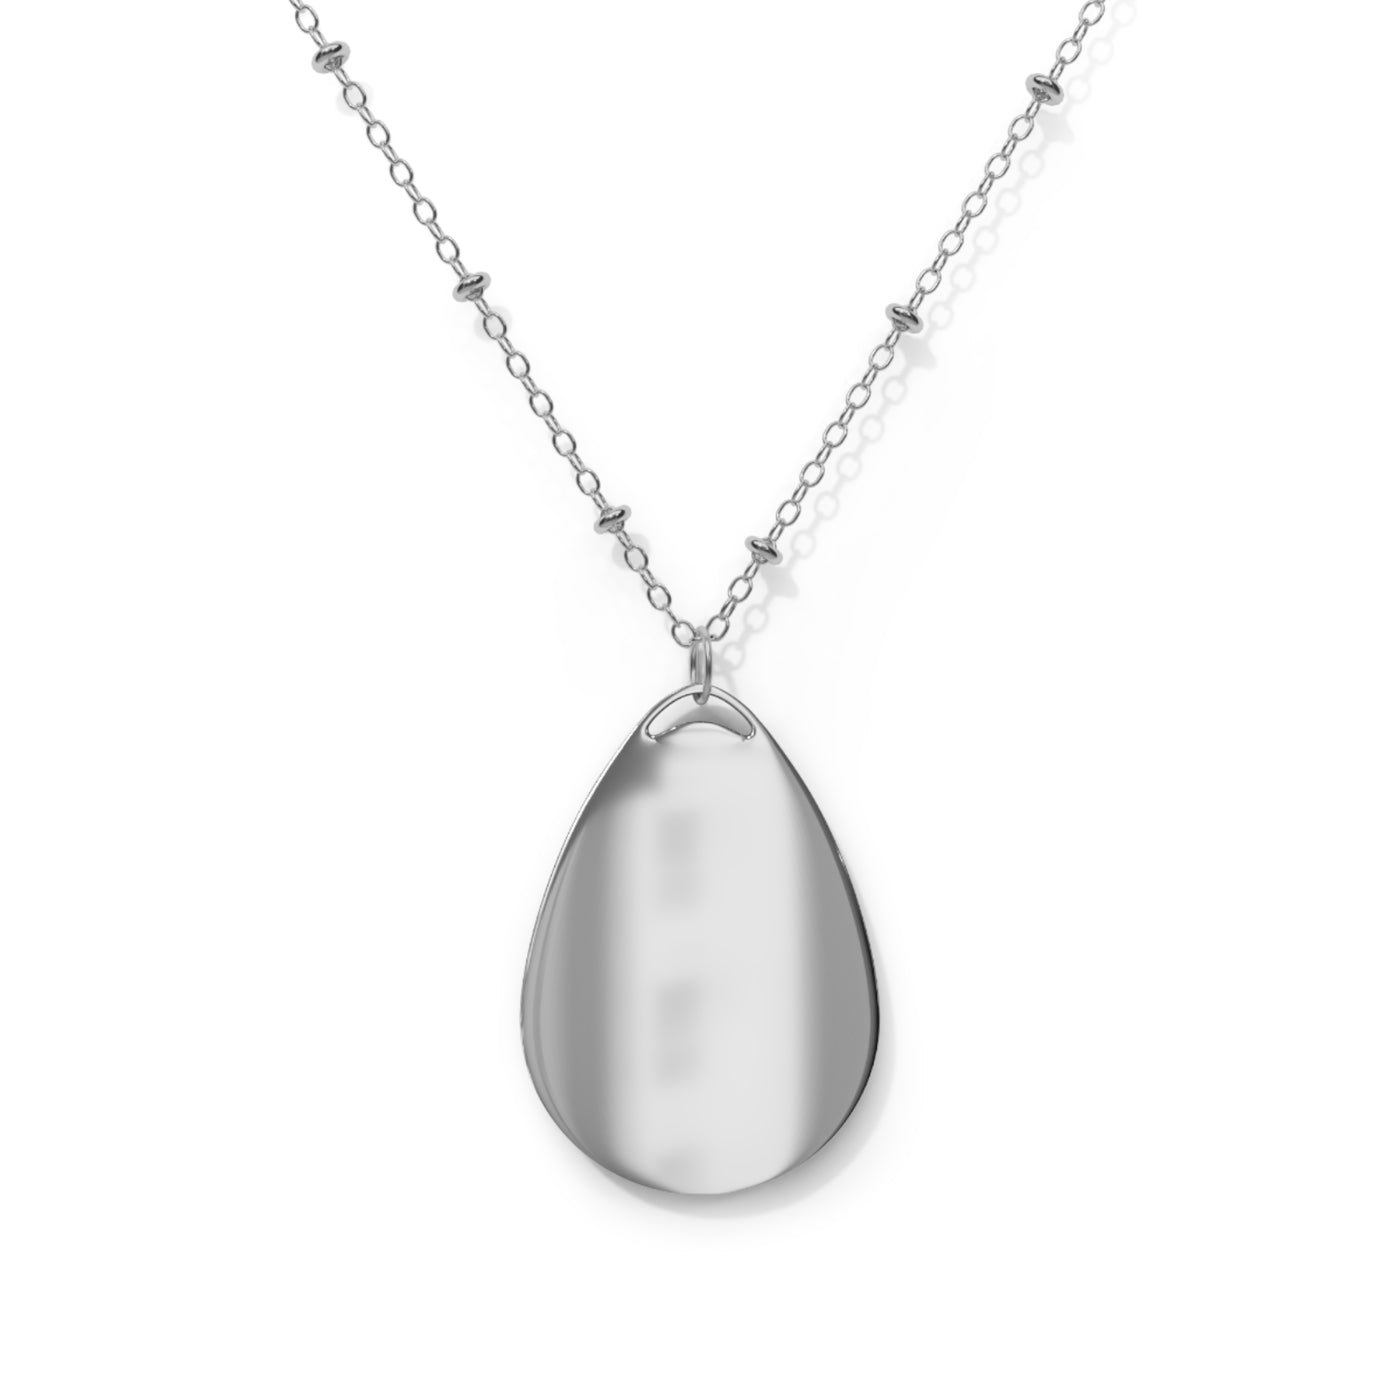 STRENGH IN EVERY WAY Oval Necklace